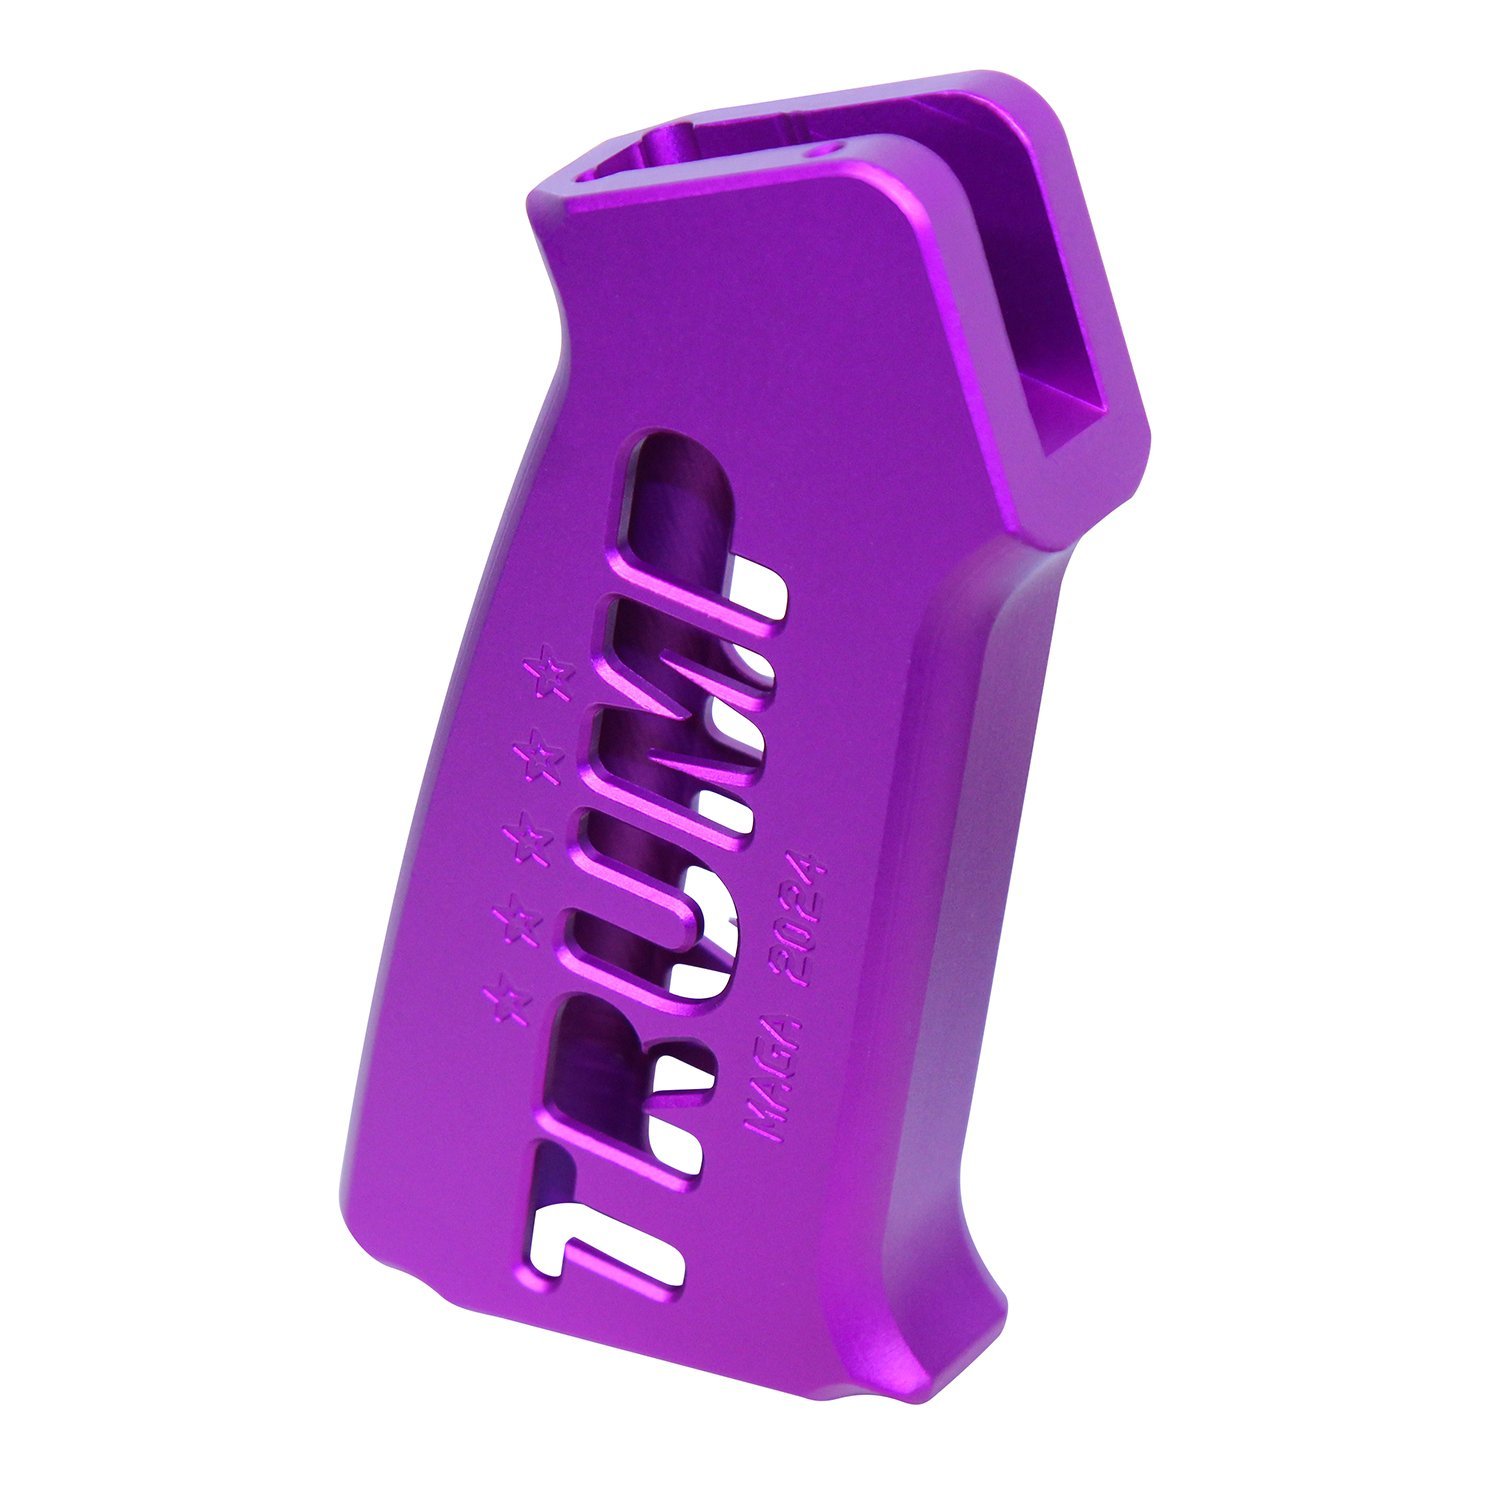 AR-15 "Trump Series" Limited Edition Pistol Grip in Anodized Purple